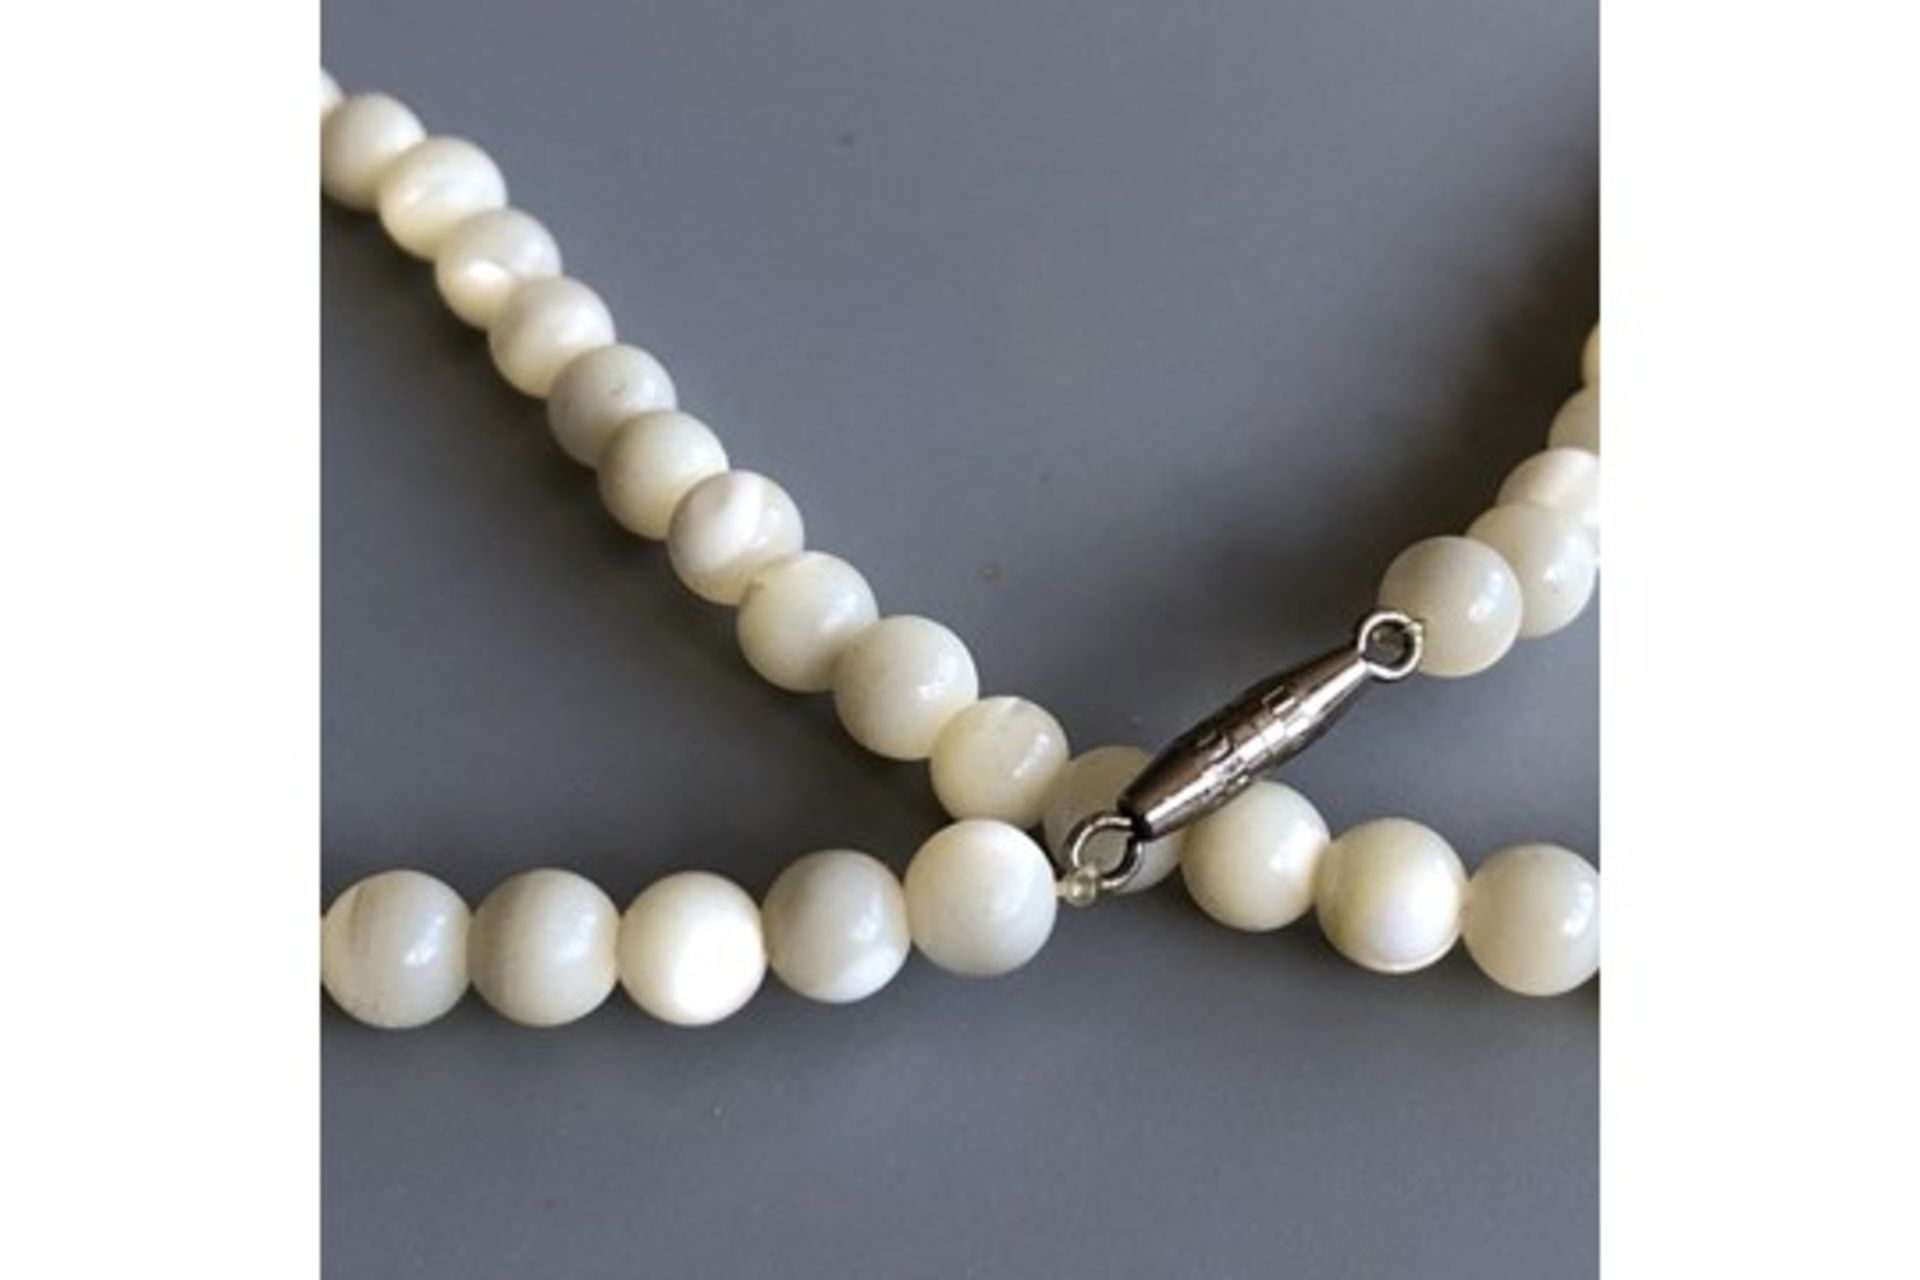 Antique Mother of Pearl Bead Necklace - small round 5mm beads - screw clasp - Image 2 of 3